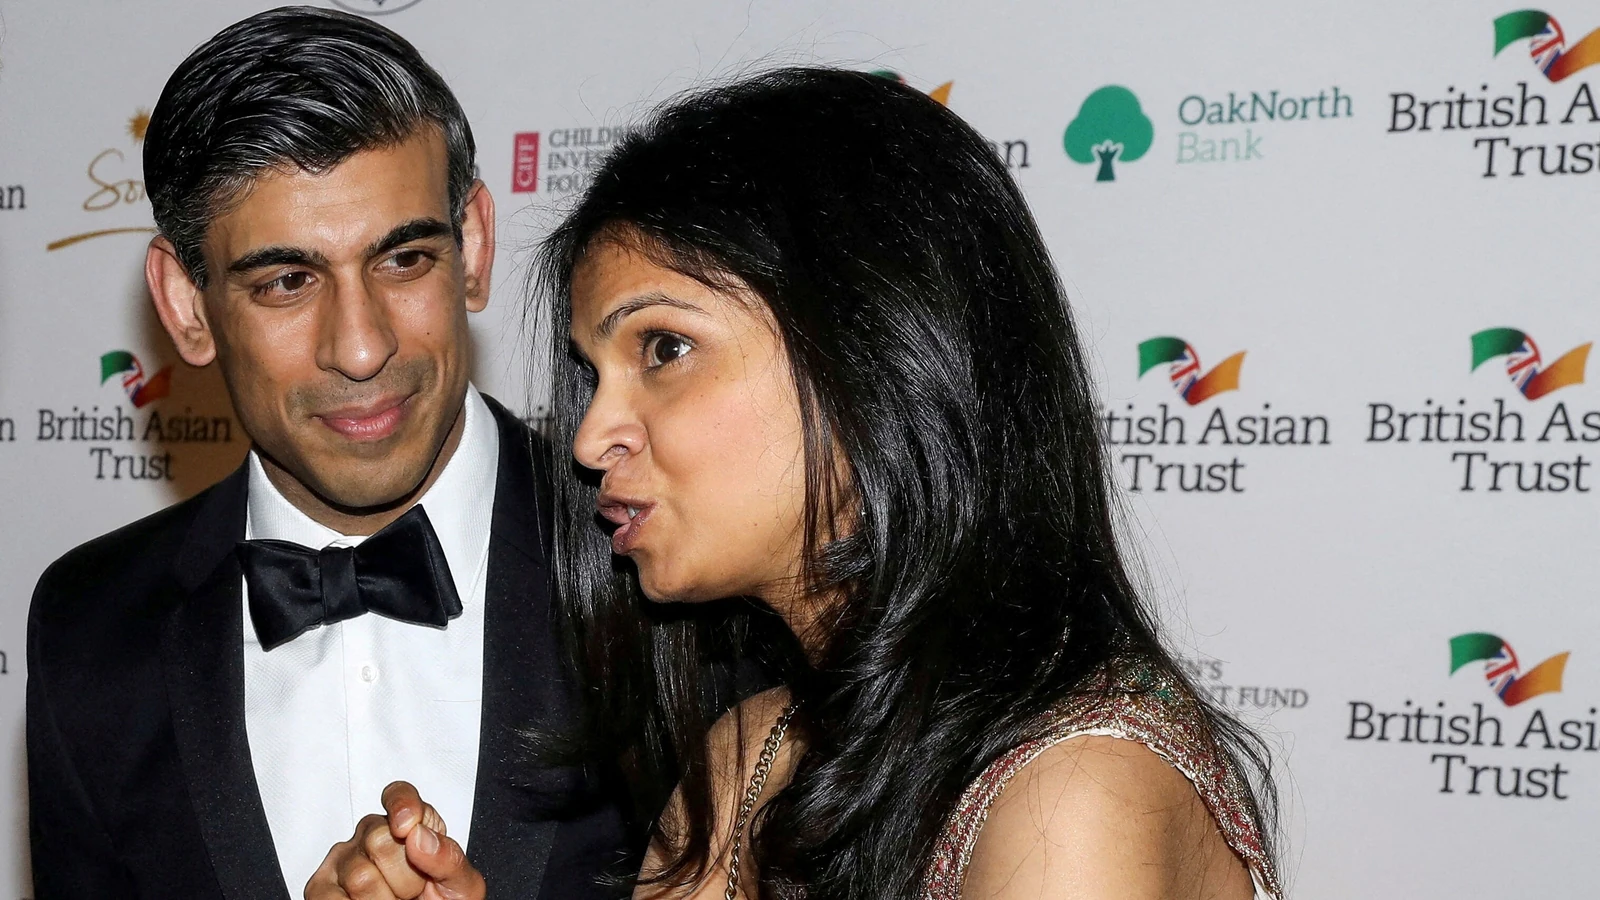 What is a non-dom? All you need to know about tax status claimed by Rishi Sunak’s wife